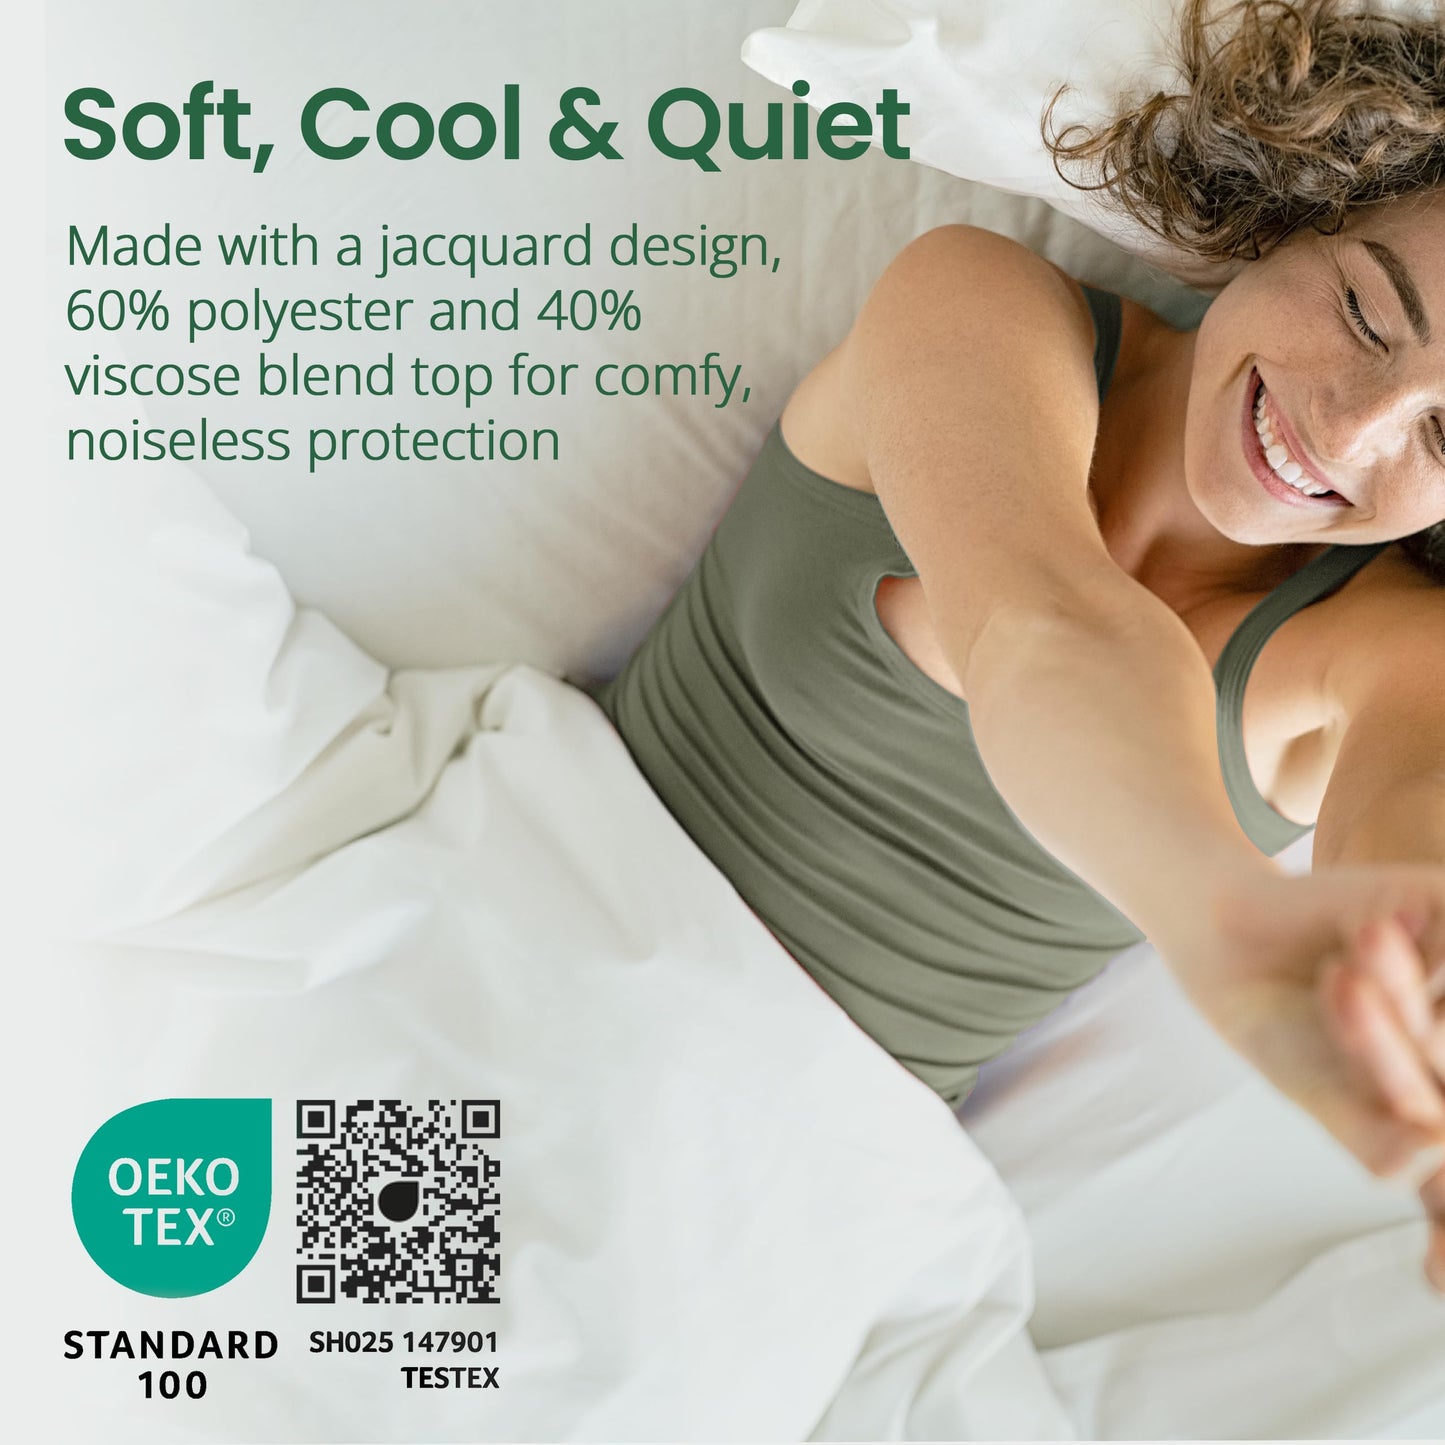 SafeRest 100% Waterproof Twin Size Mattress Protector - Fitted with Stretchable Pockets - Machine Washable Cotton Mattress Cover for Bed - Perfect Bedding Airbnb Essentials for Hosts